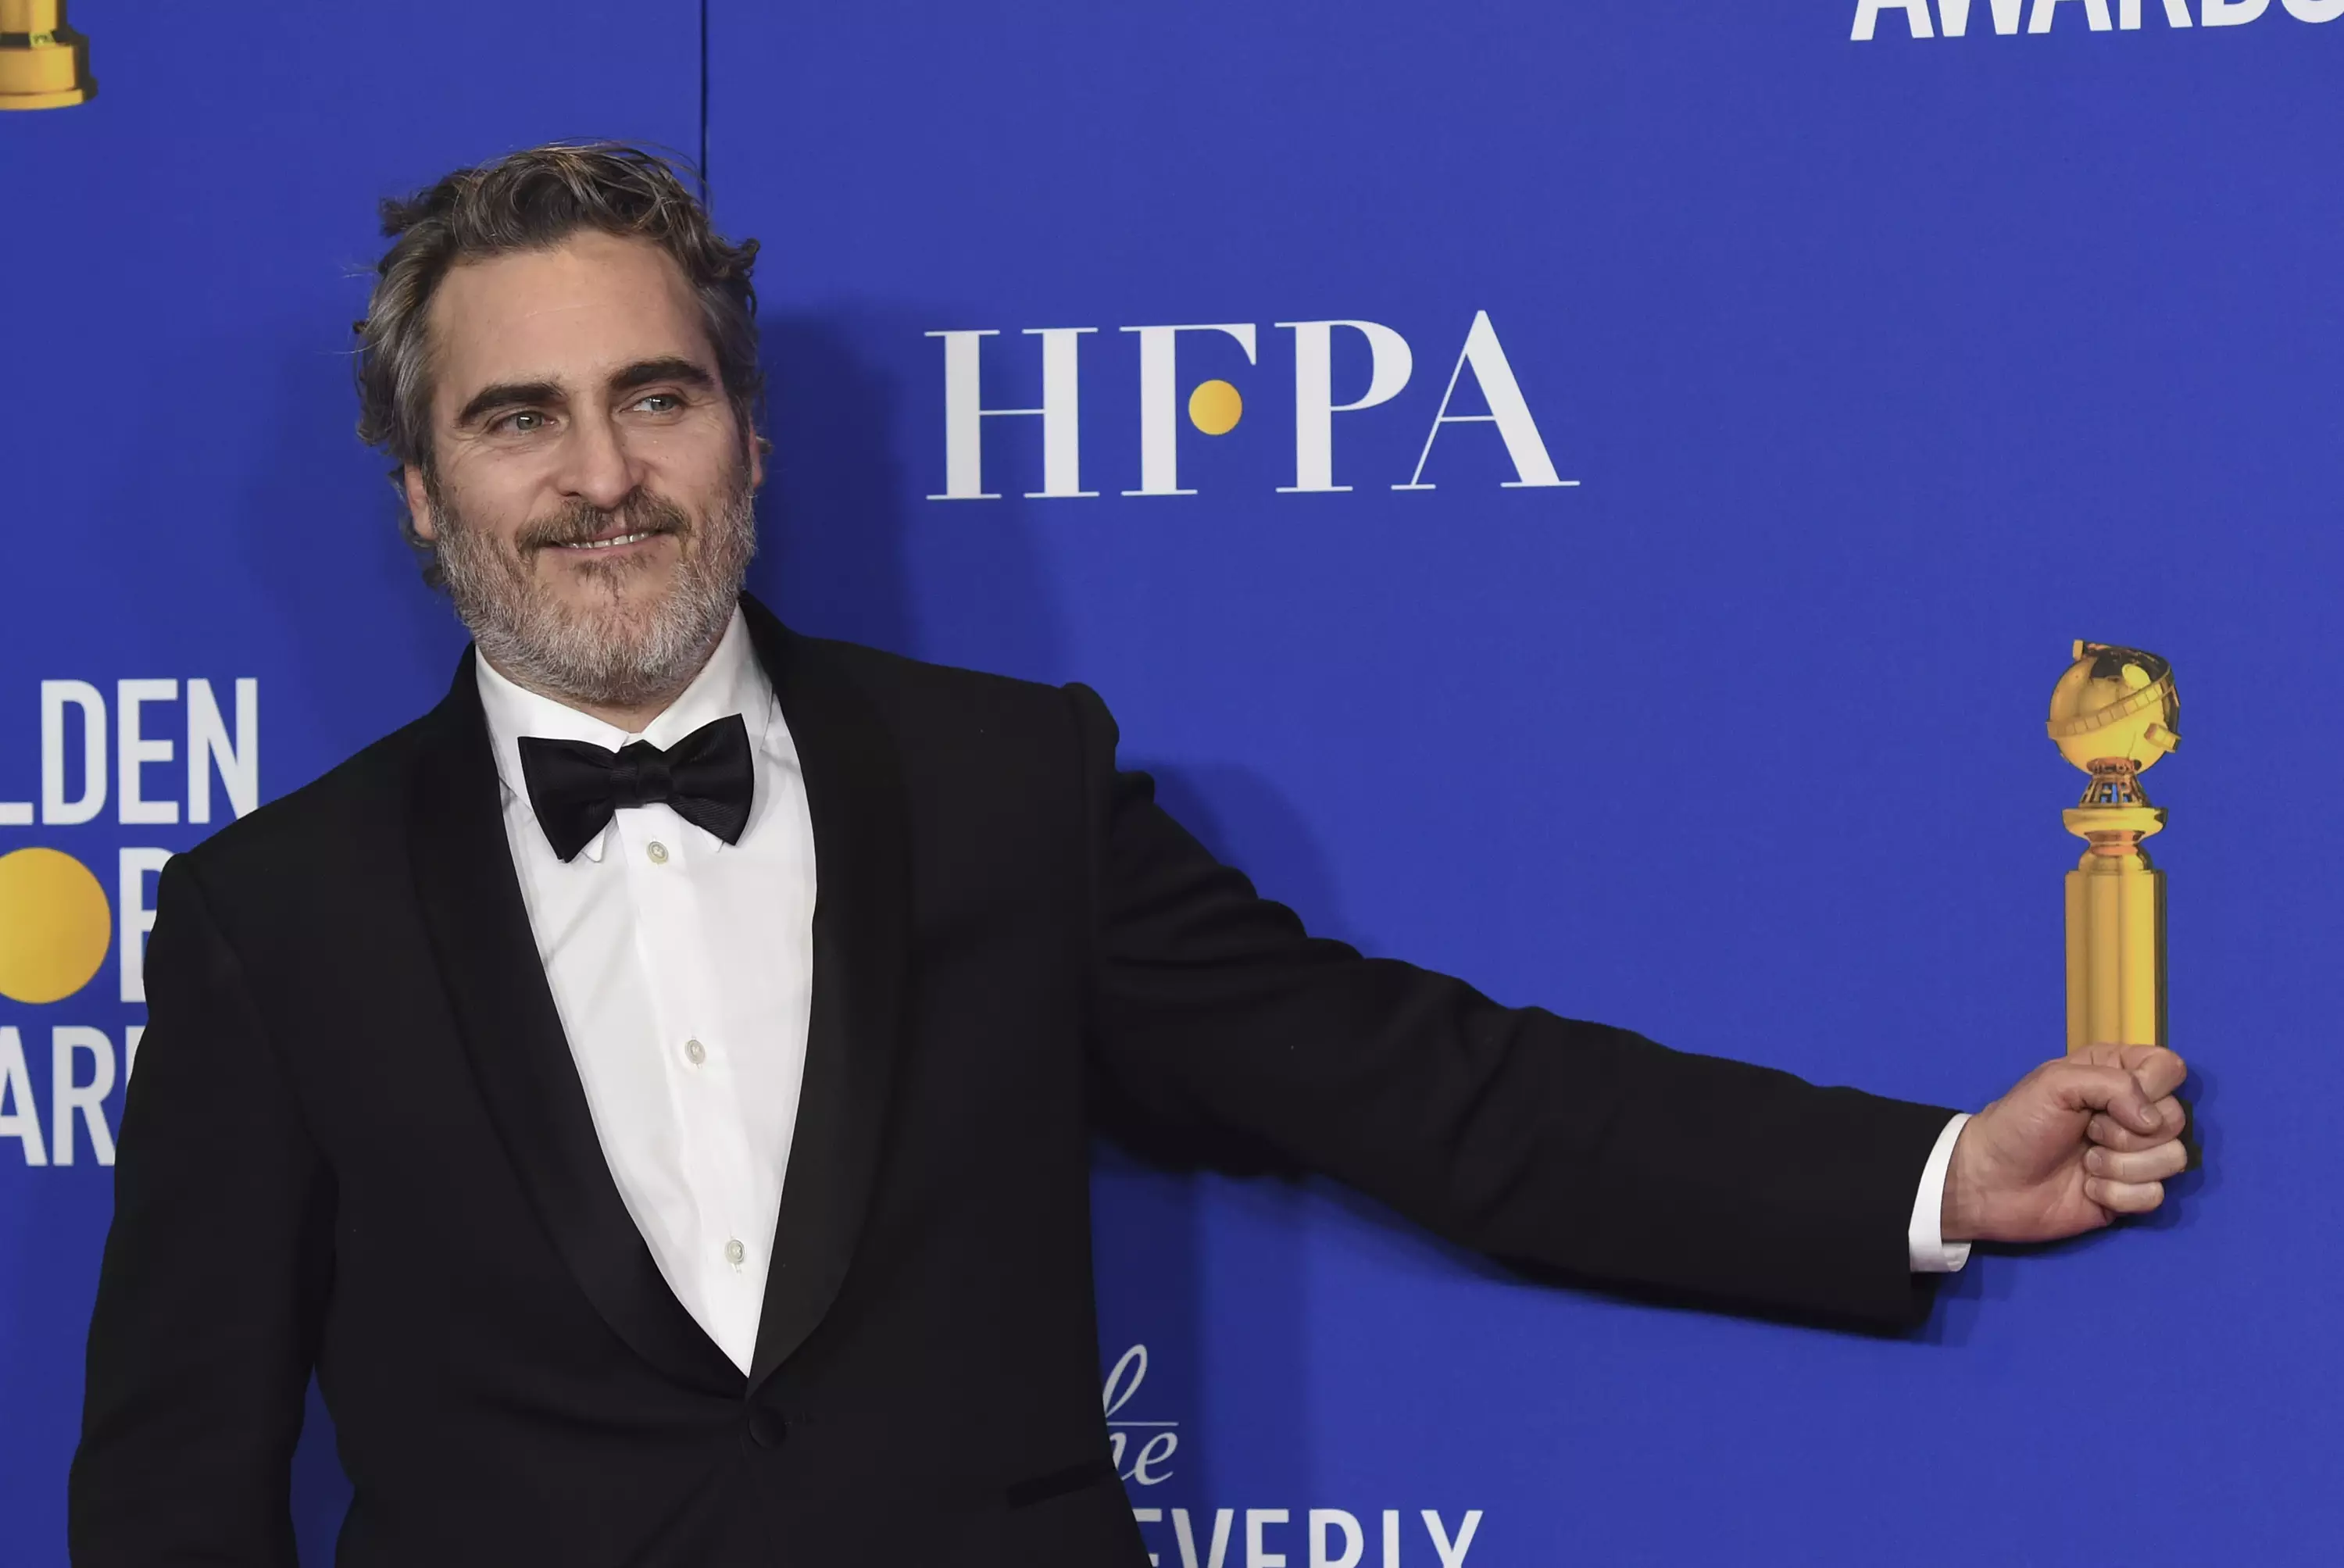 Joaquin Phoenix is up for the leading actor award.